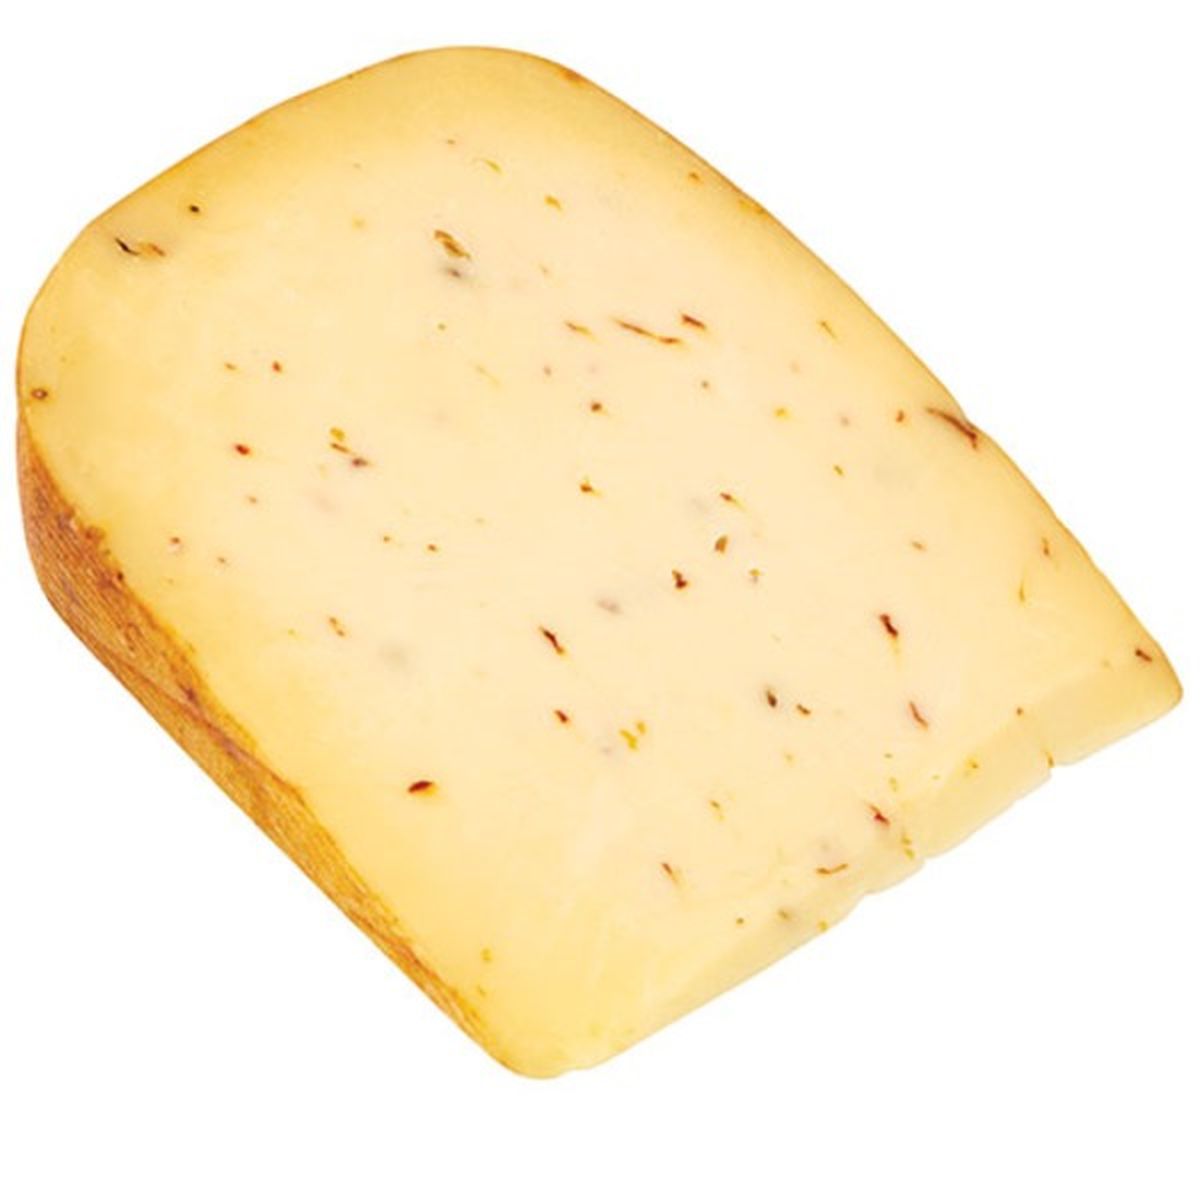 Calories in Roth Cheese 3 Chili Pepper Gouda Cheese